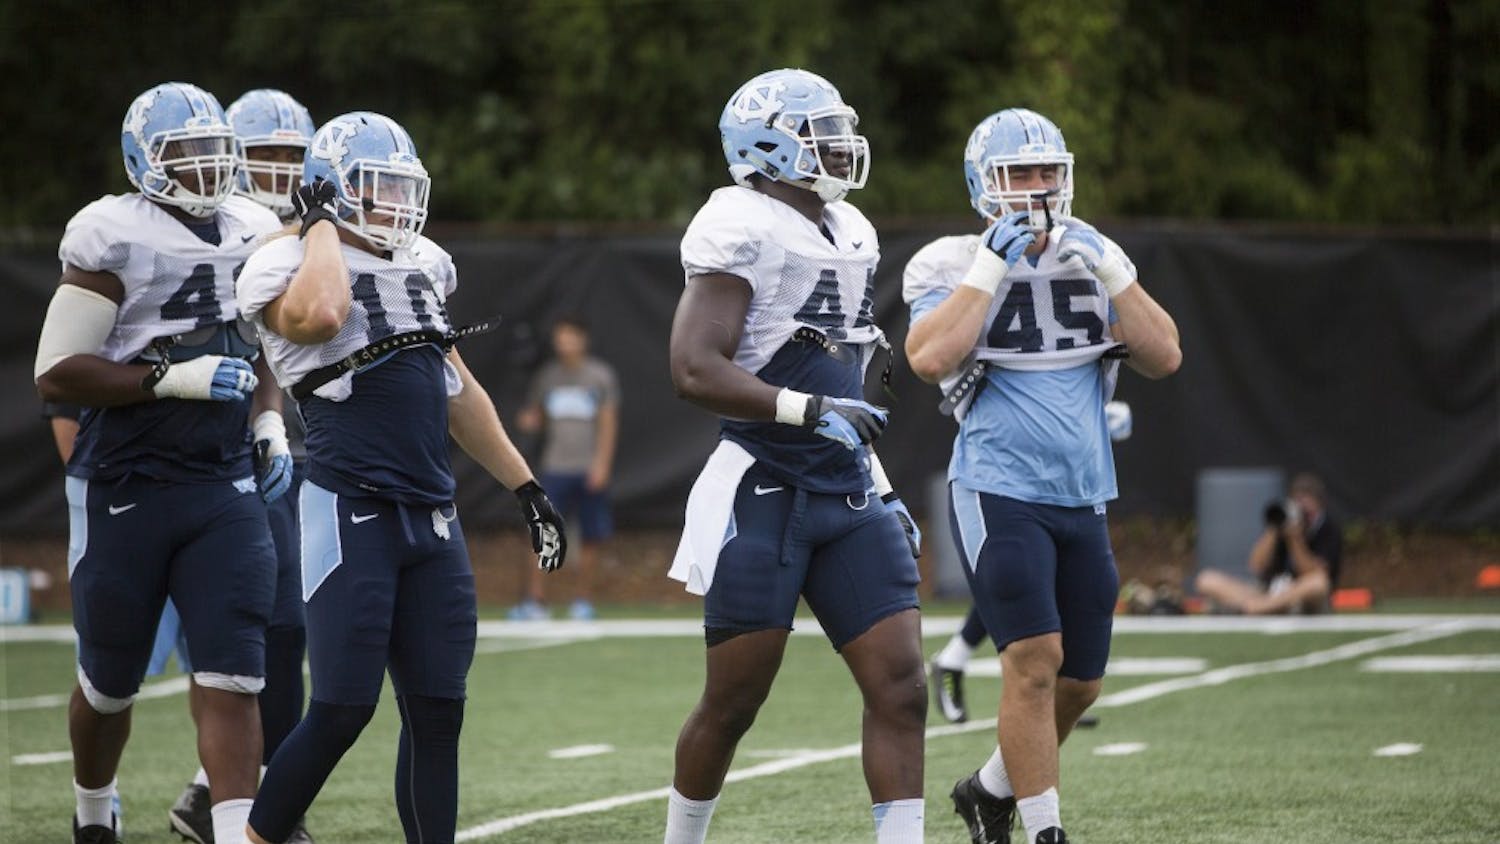 Tarheel Junior Gnonkonde, center, lines up to run through a play during practice on Tuesday, August 25, 2015.